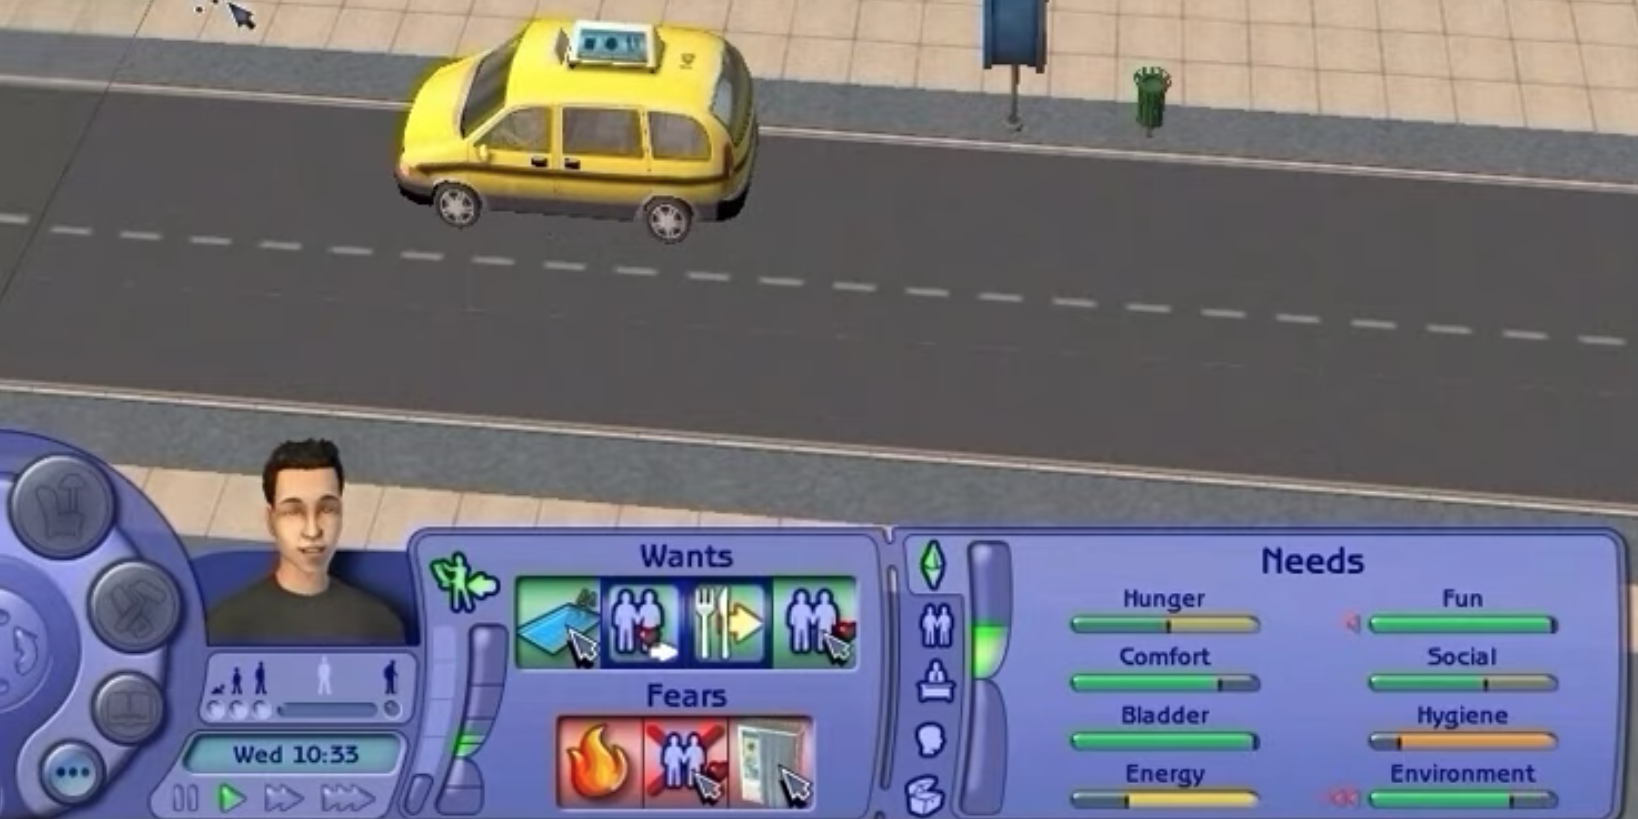 A screenshot of The Sims 2 UI showing wants and fears